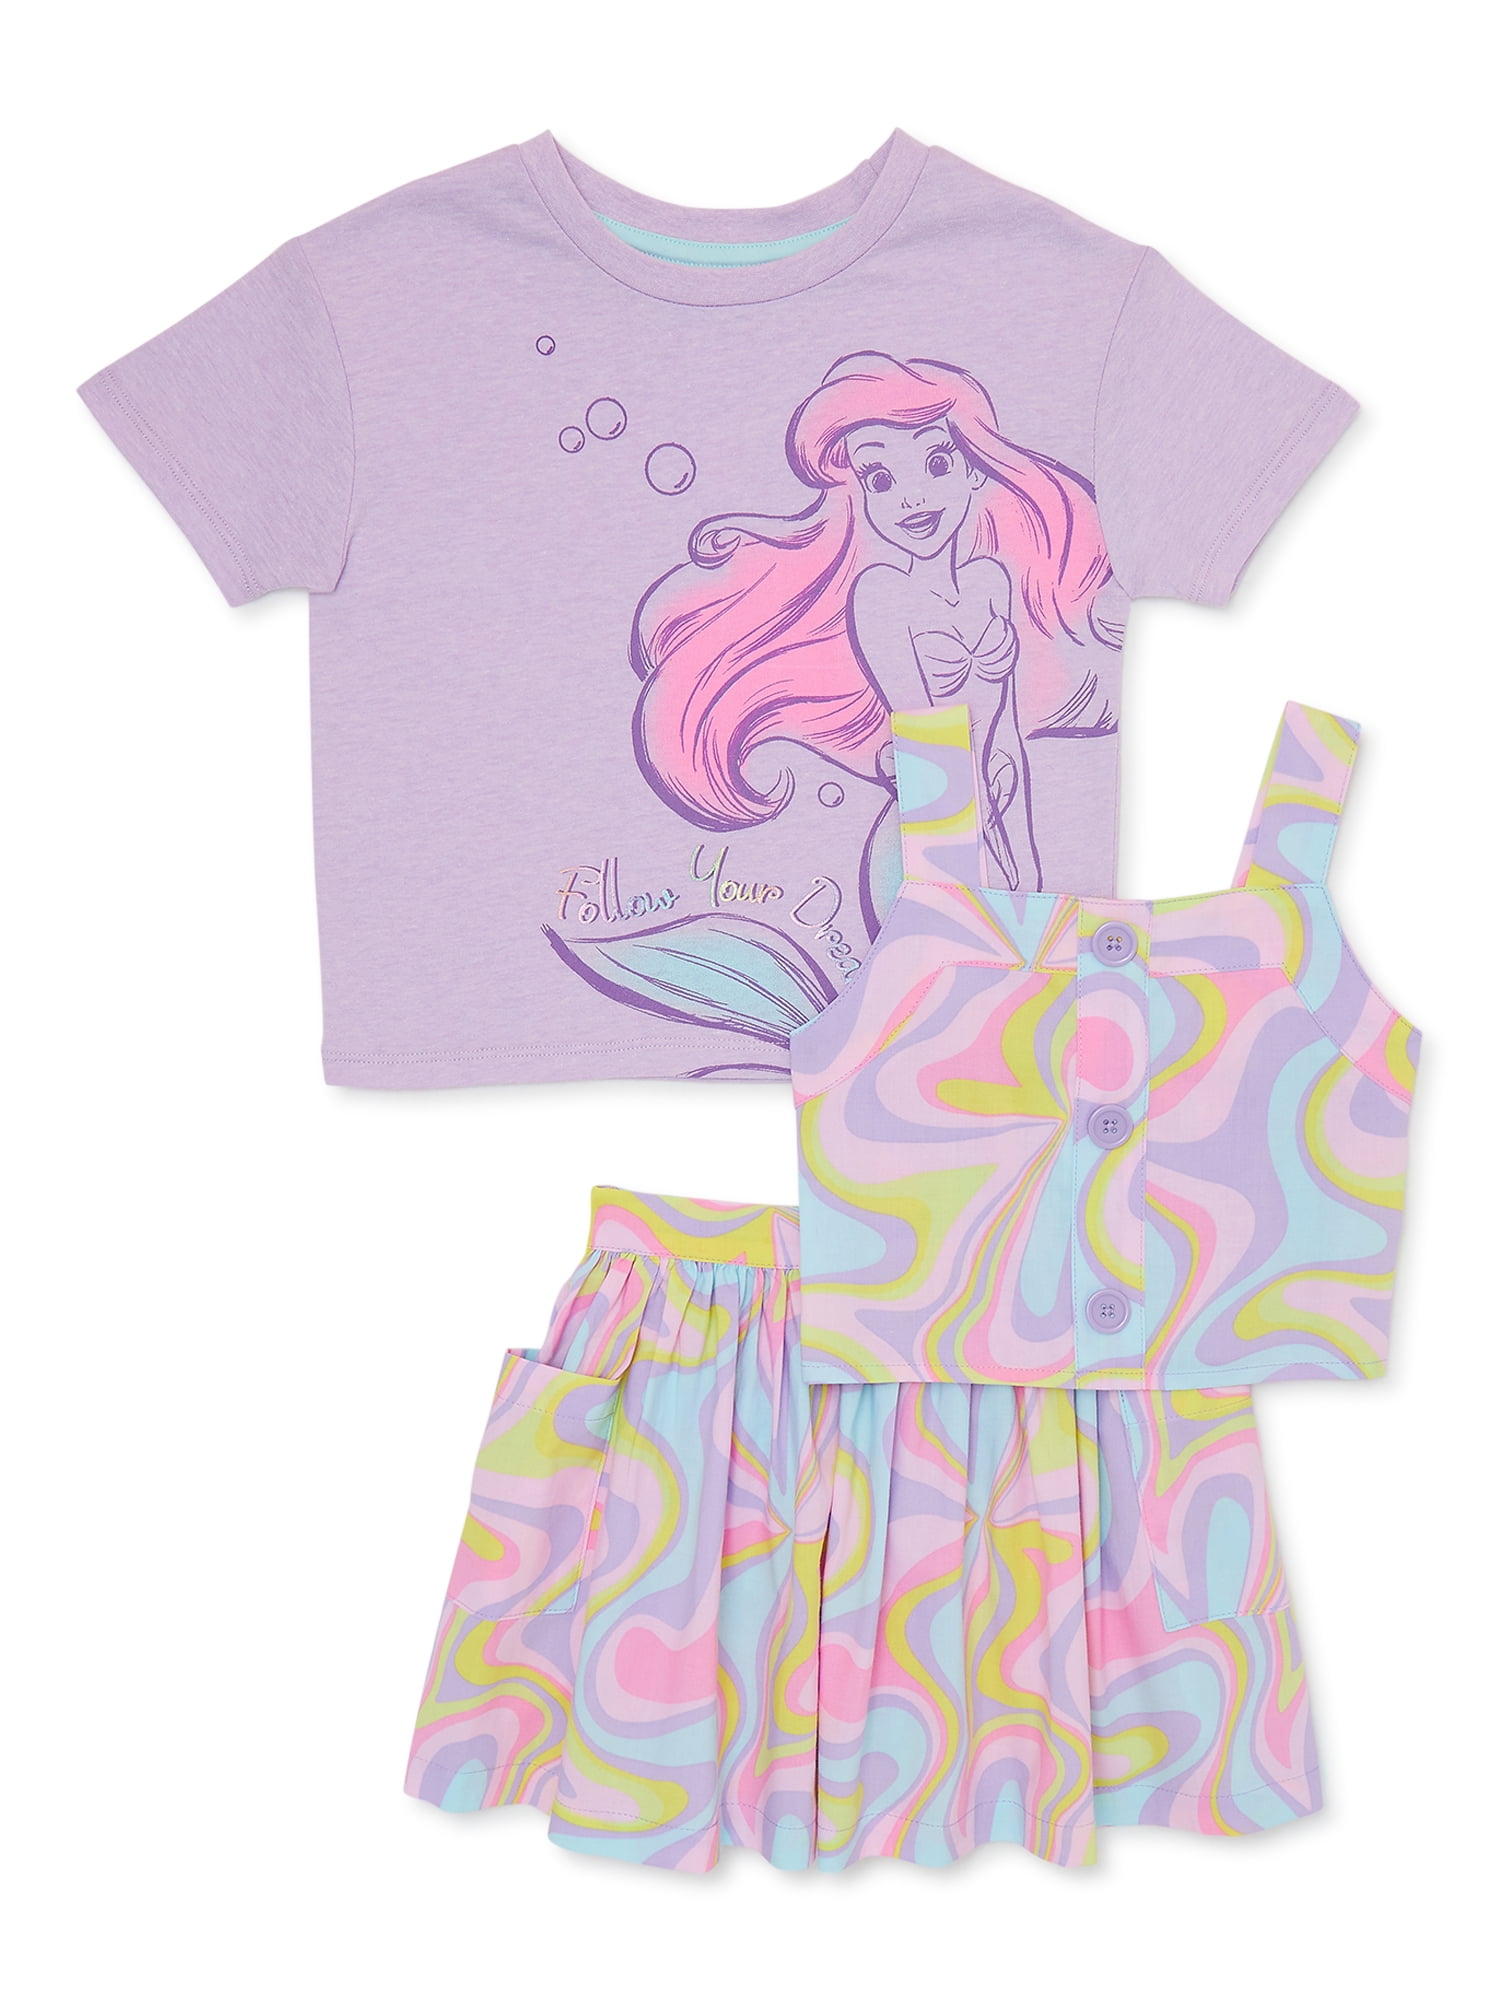 The Little Mermaid Baby and Toddler Girls Tee, Tank and Skirt Set, 3-Piece, Sizes 12M-5T